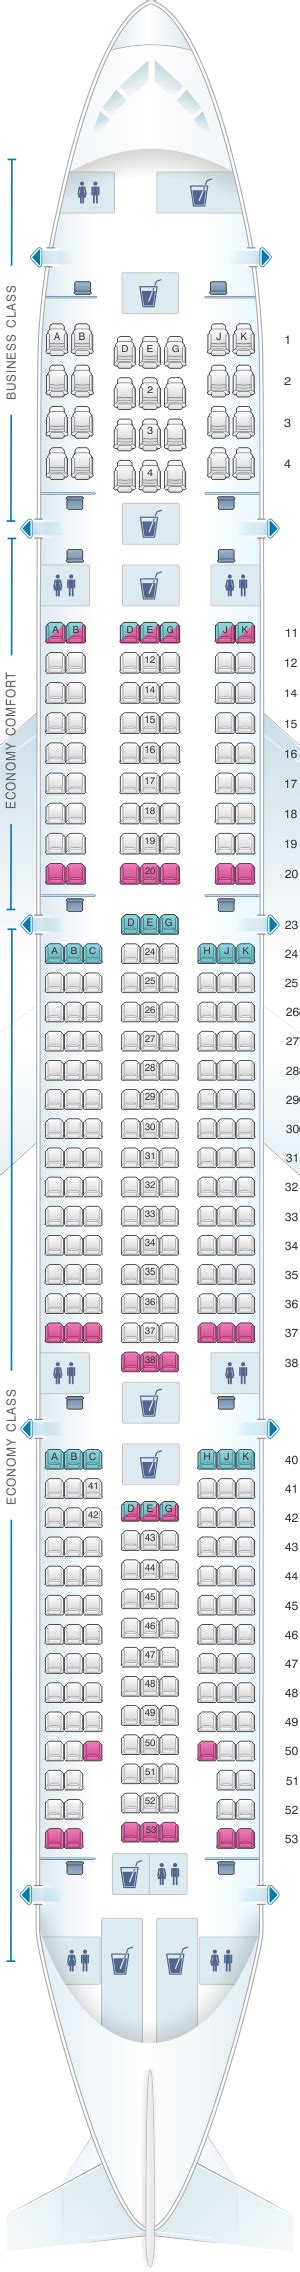 Turkish Airlines Boeing Er Economy Class Seating Layout My XXX Hot Girl